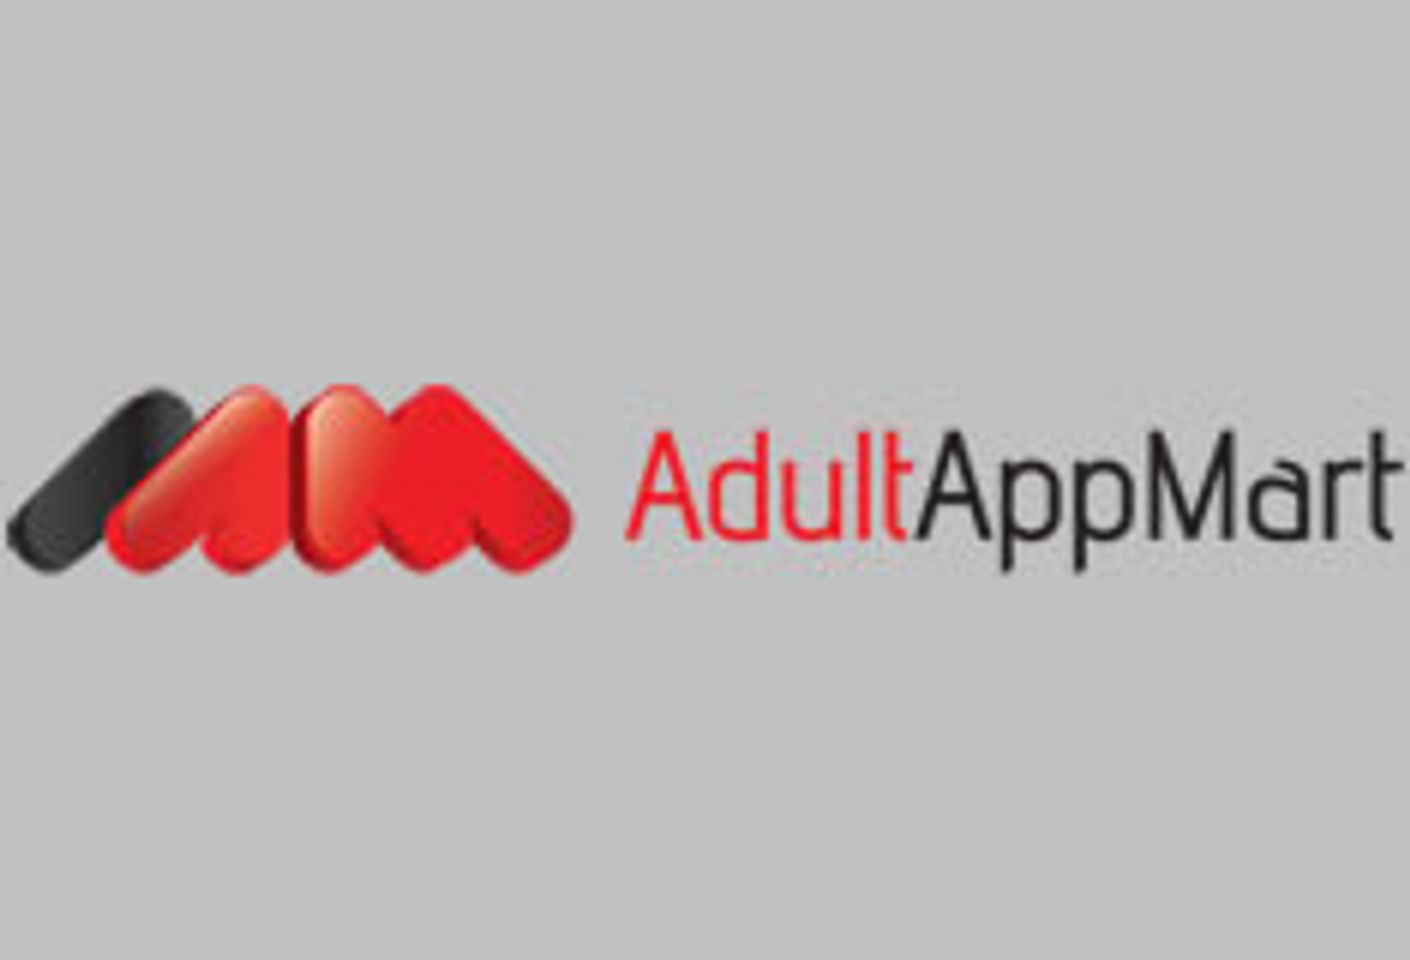 AdultAppMart Has 6 Fun New Adult Games and Puzzles